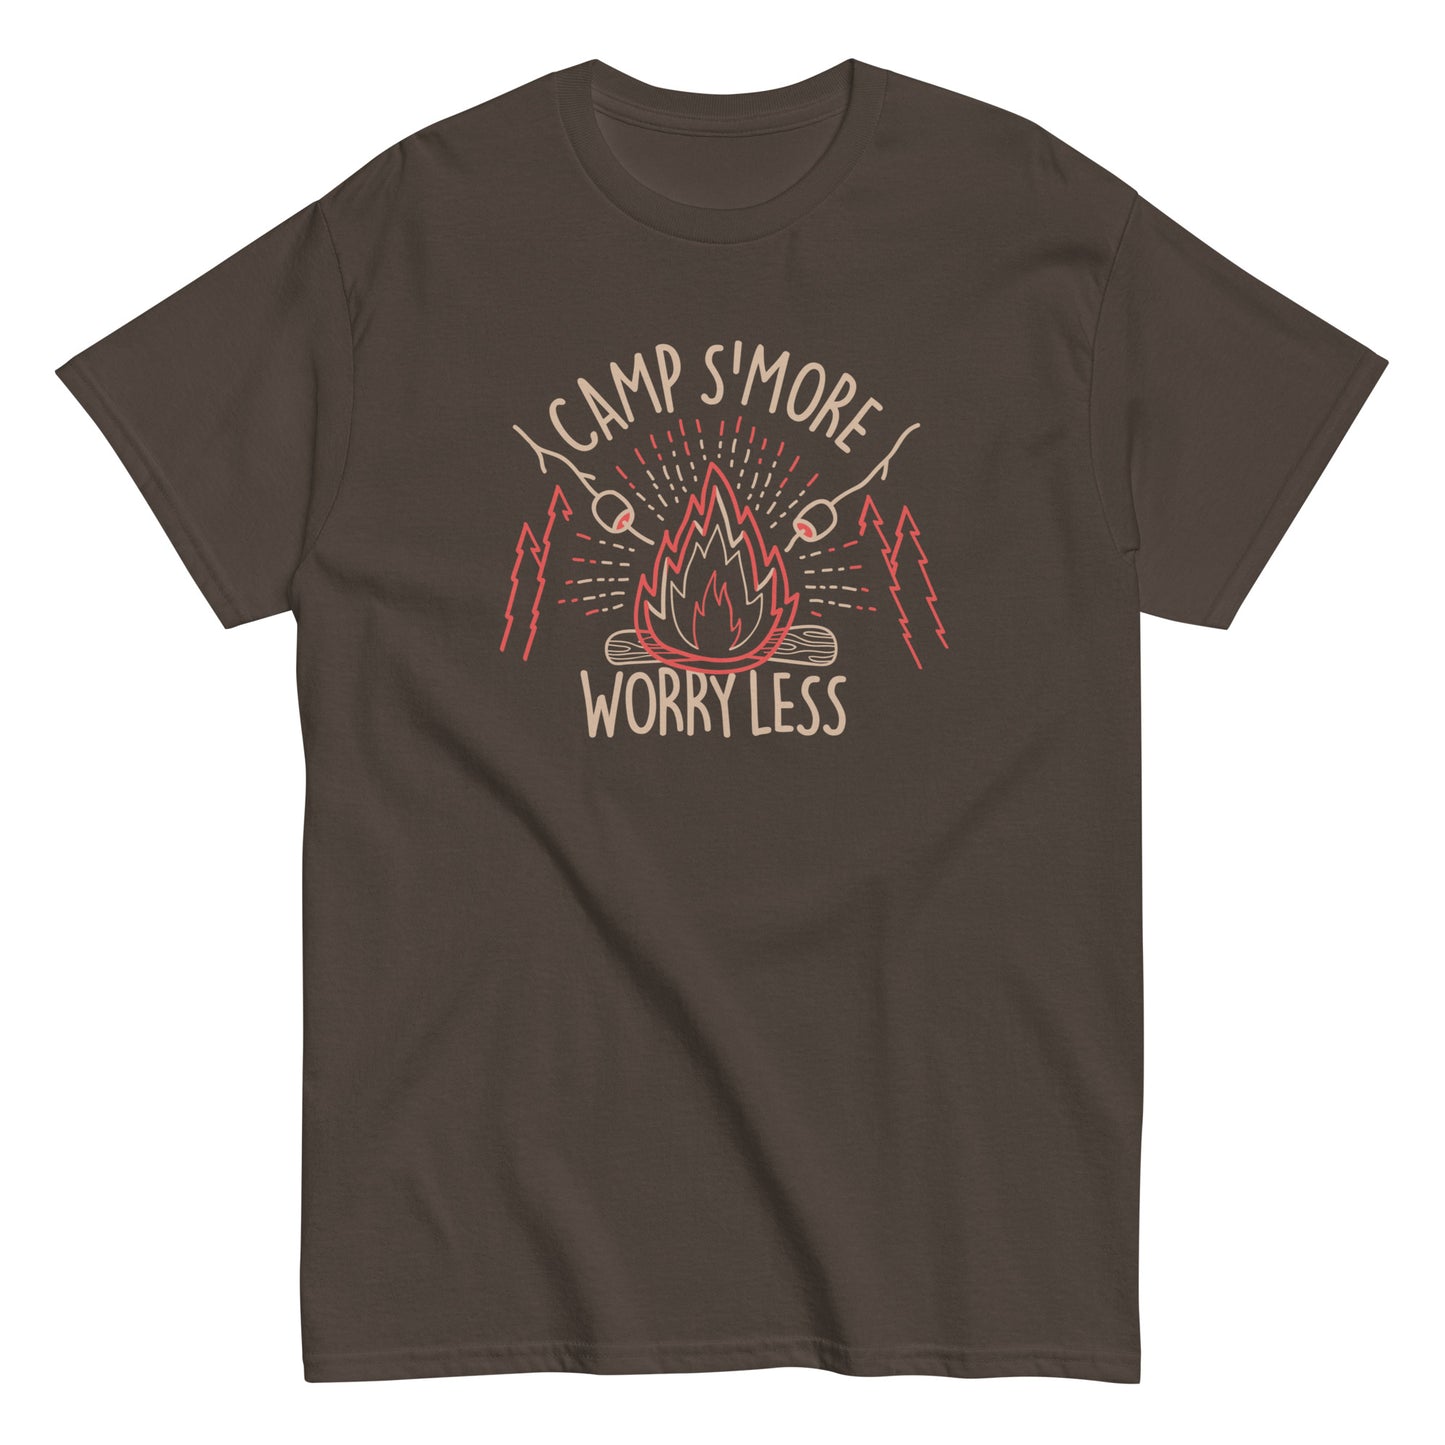 Camp S'more Worry Less Men's Classic Tee